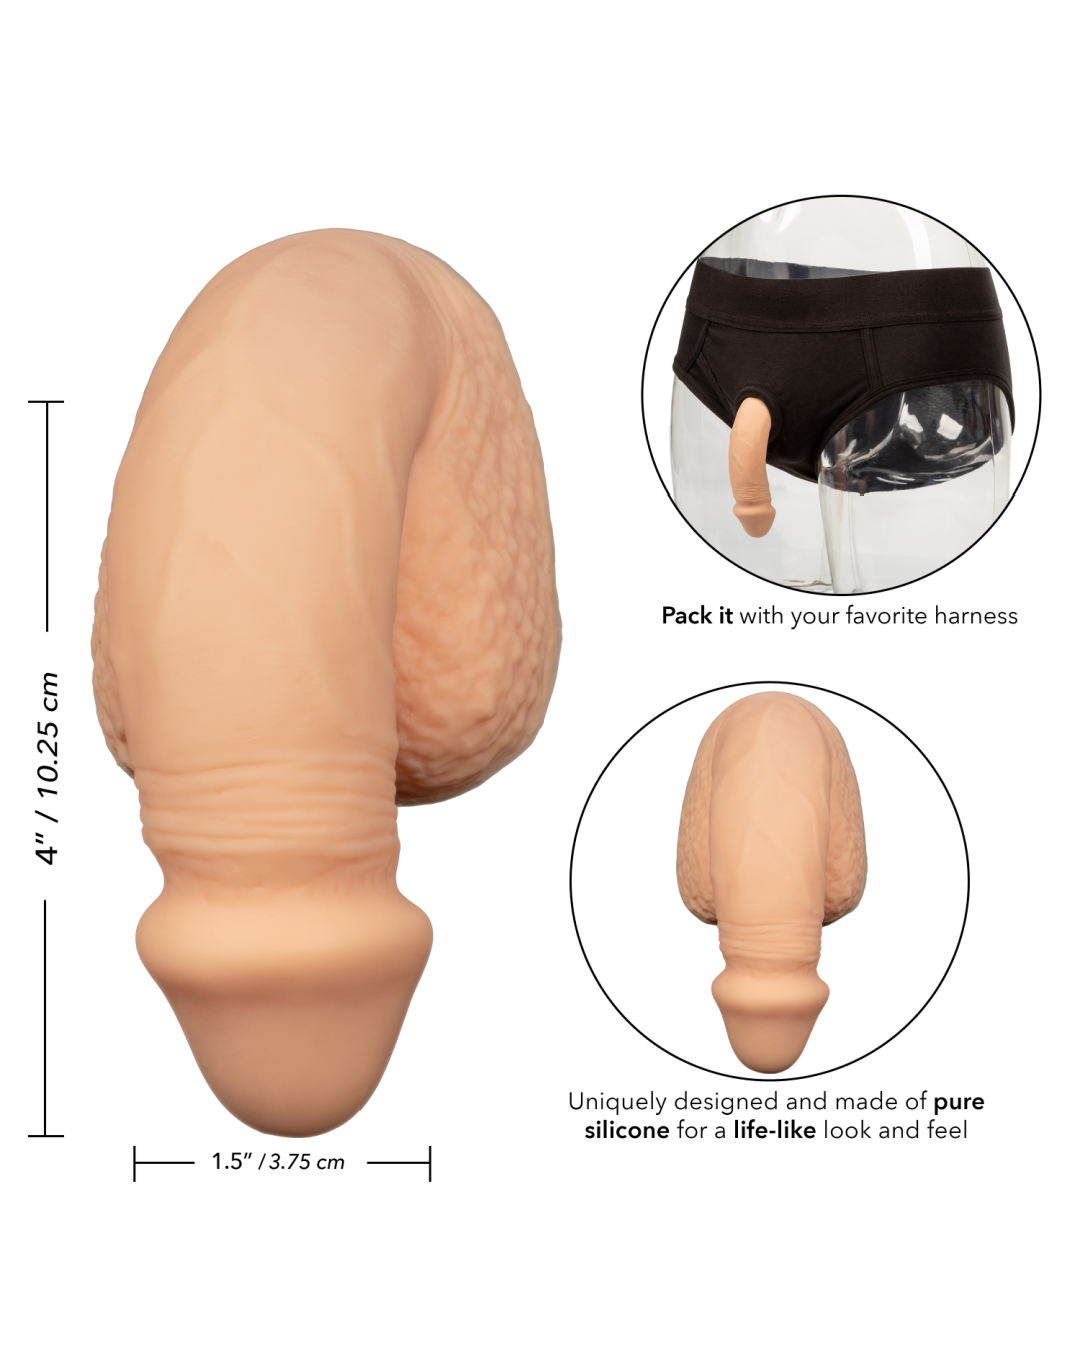 Packer Gear Silicone Packing Penis 4 Inch - Vanilla